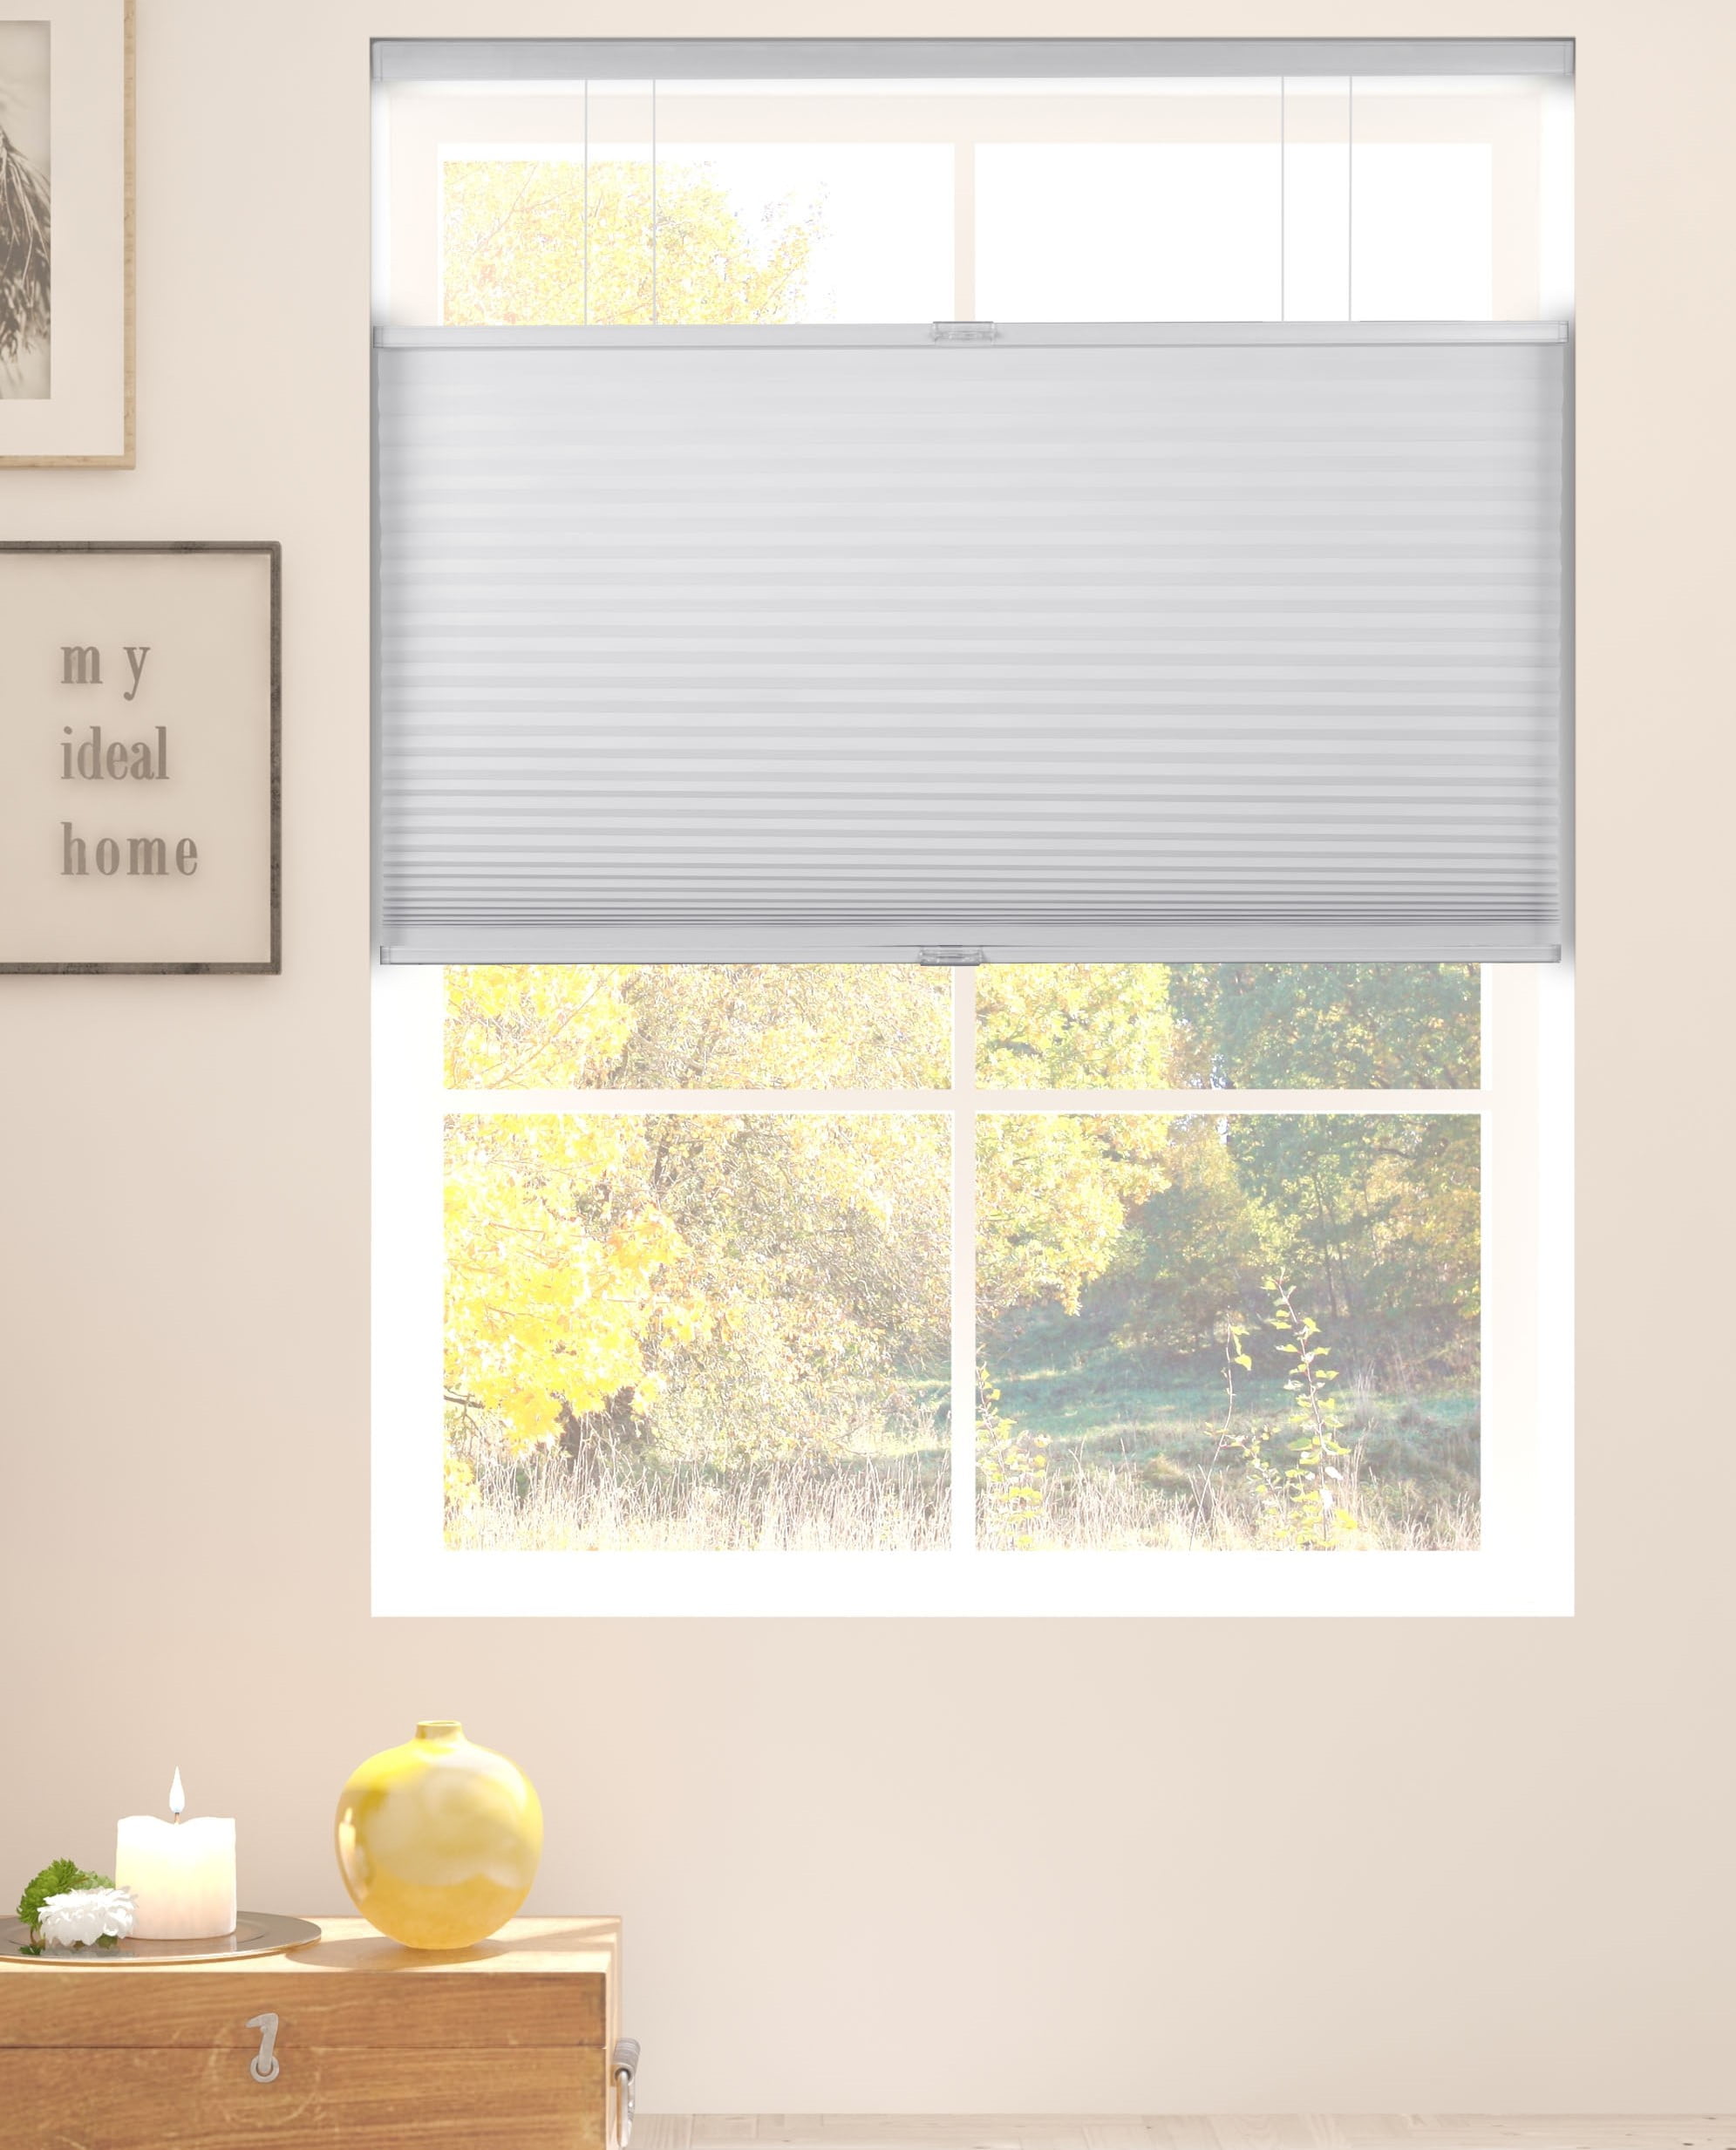 Cellular Blinds H Top Down Bottom Up Shades Honeycomb Blinds Cellular Shades 